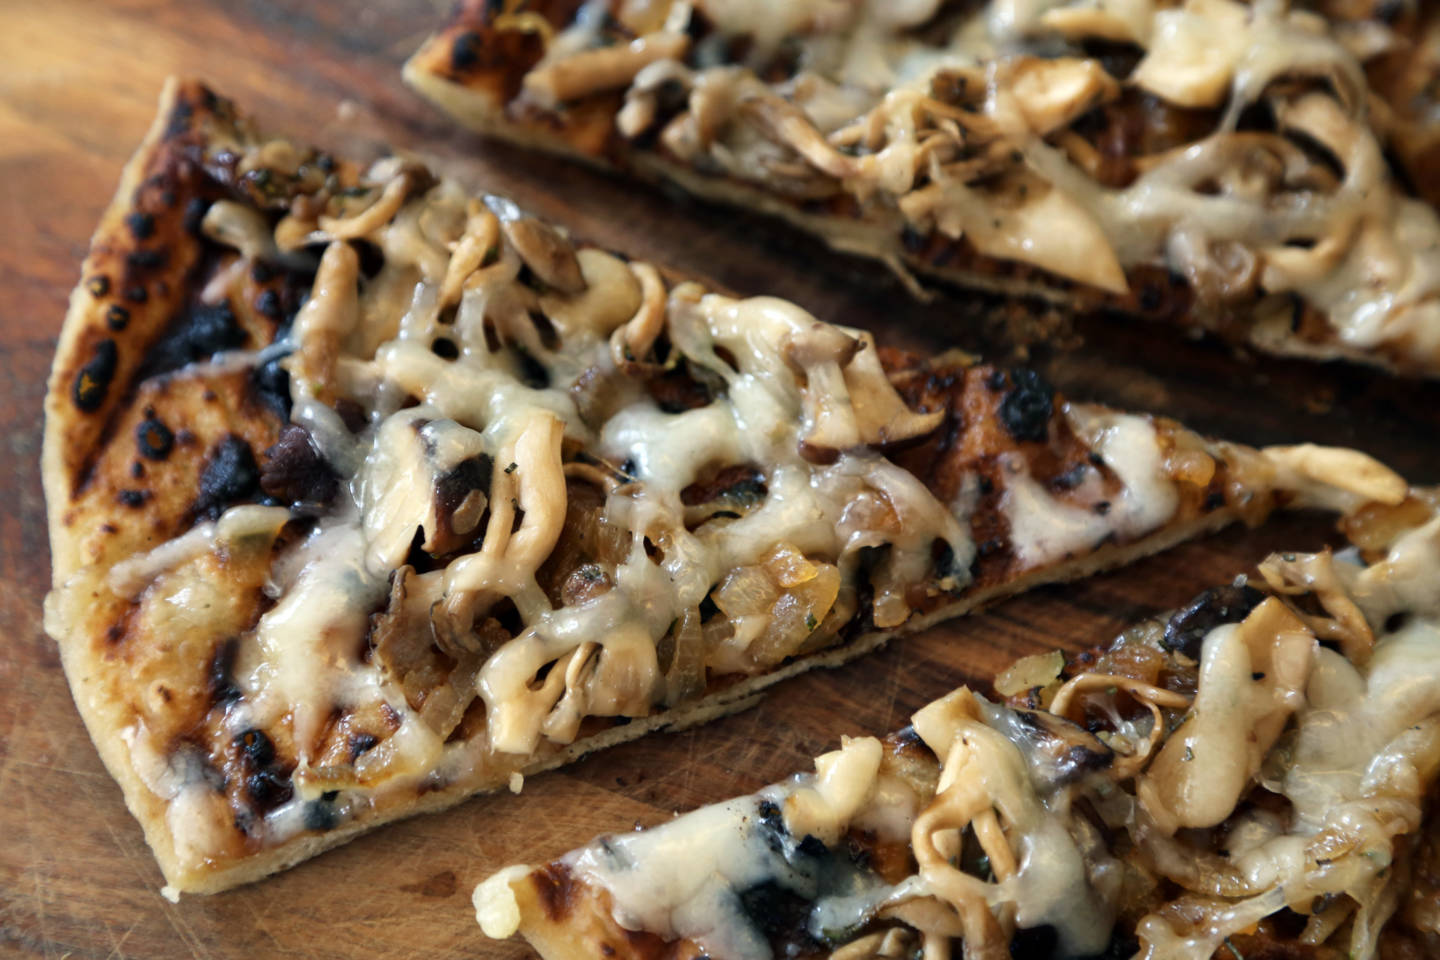 Grilled pizza with wild mushrooms, caramelized onions, and fontina Wendy Goodfriend